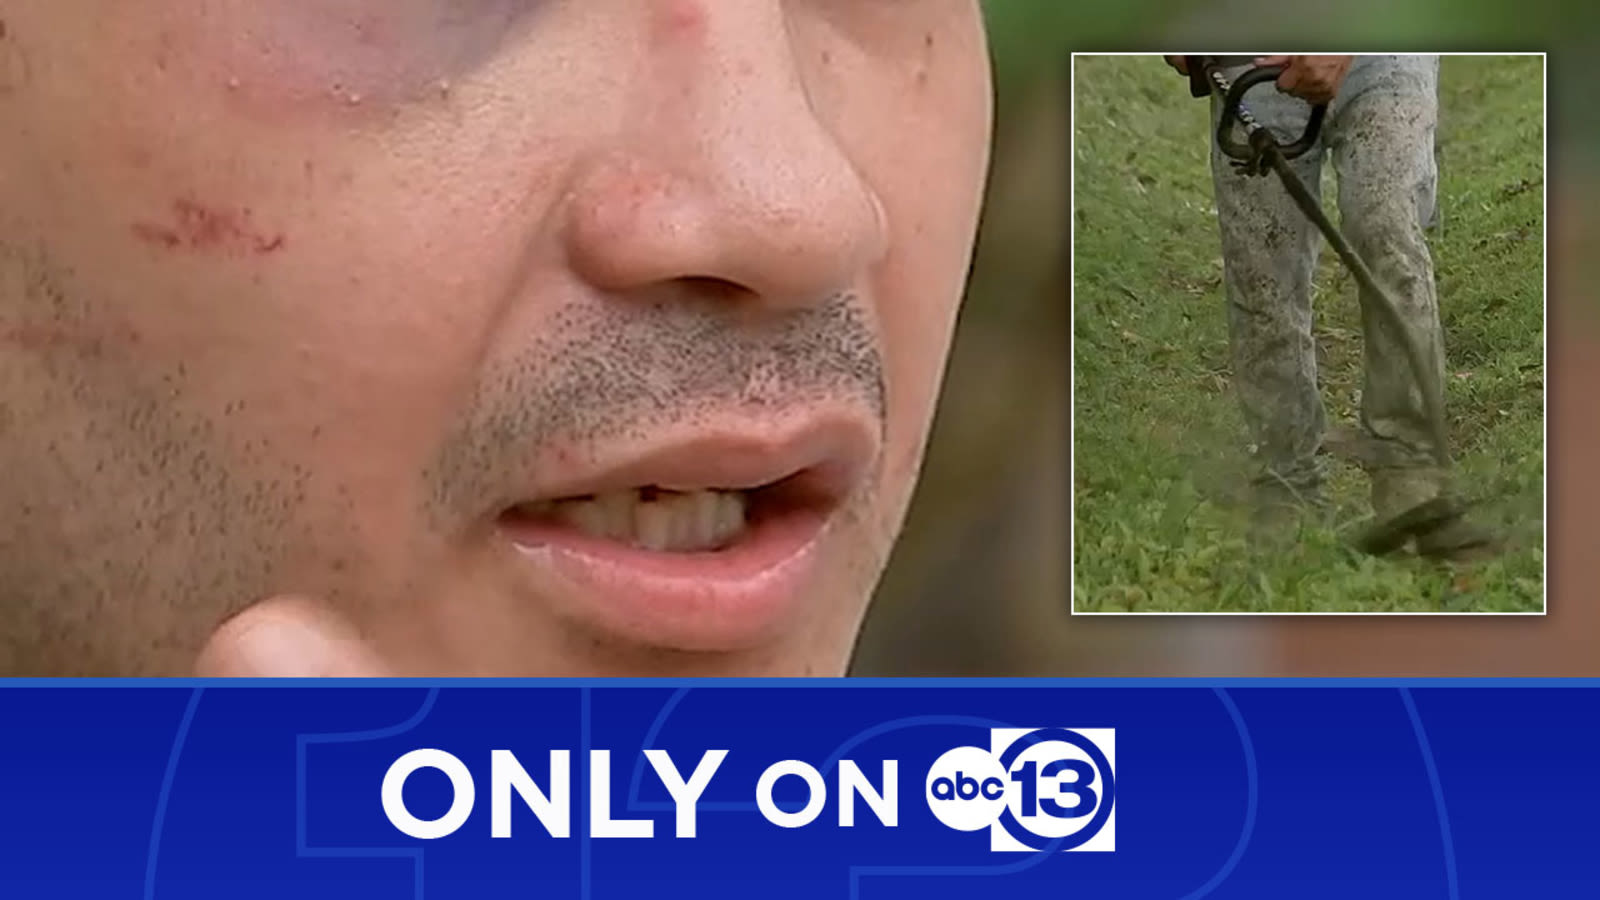 Victim claims 3 landscapers attacked him as he sought insurance info after SE Houston fender bender